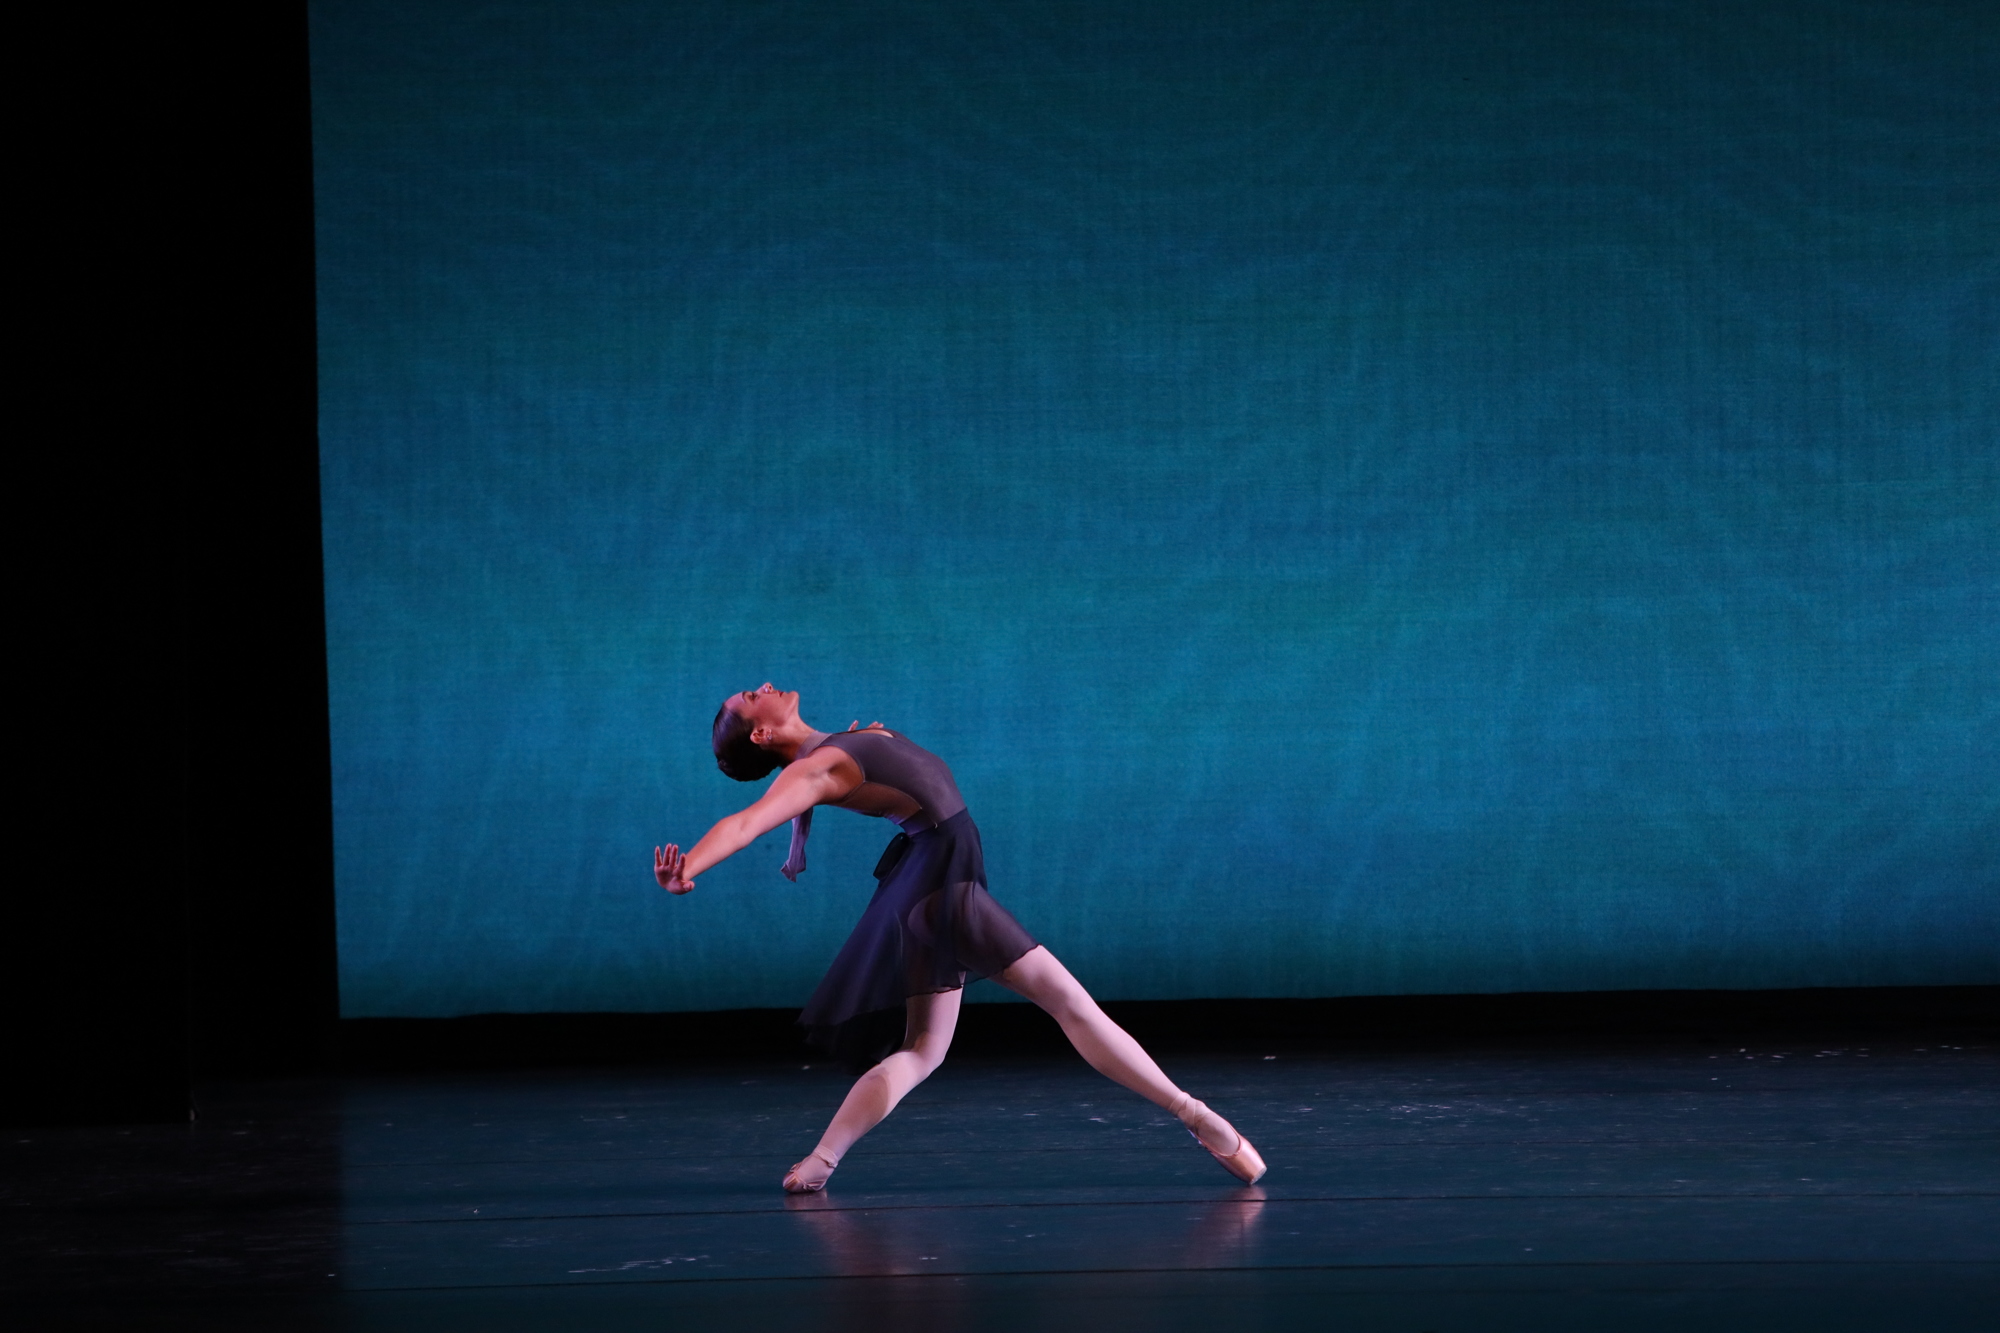 Willa Frantz, a past member of the training program, emotes in Images of Dance. (Photo Courtesy of Frank Atura)